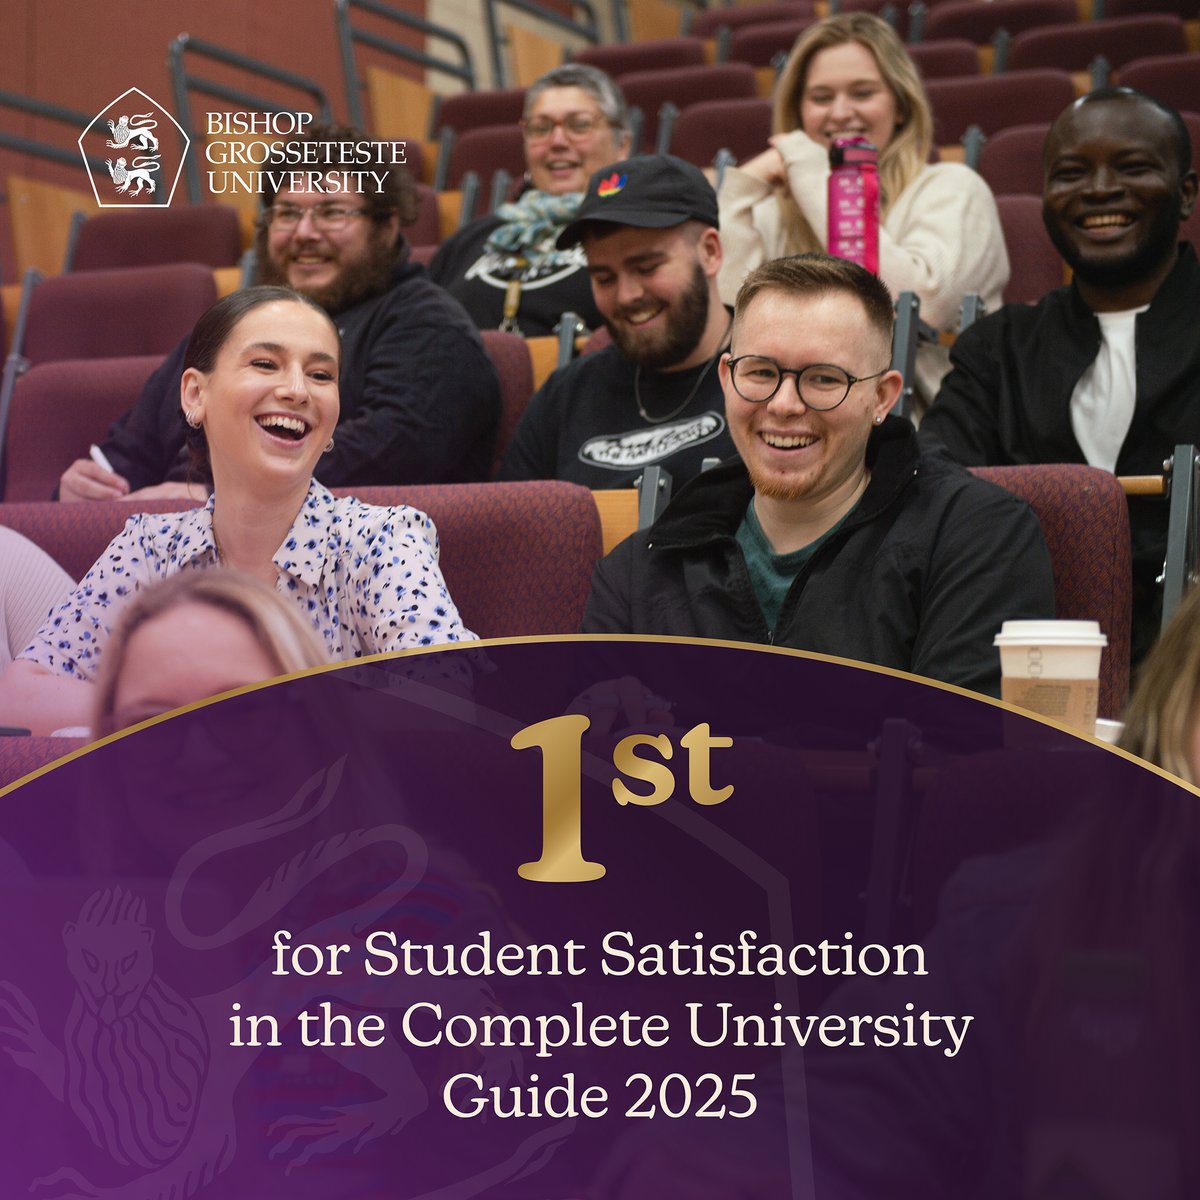 We are thrilled to announce that we have been voted 1st for Student Satisfaction in the Complete University Guide 2025🏆 Congratulations to our academic staff and our colleagues who support them in delivering transformative education. More on our awards: bit.ly/40MNZ55